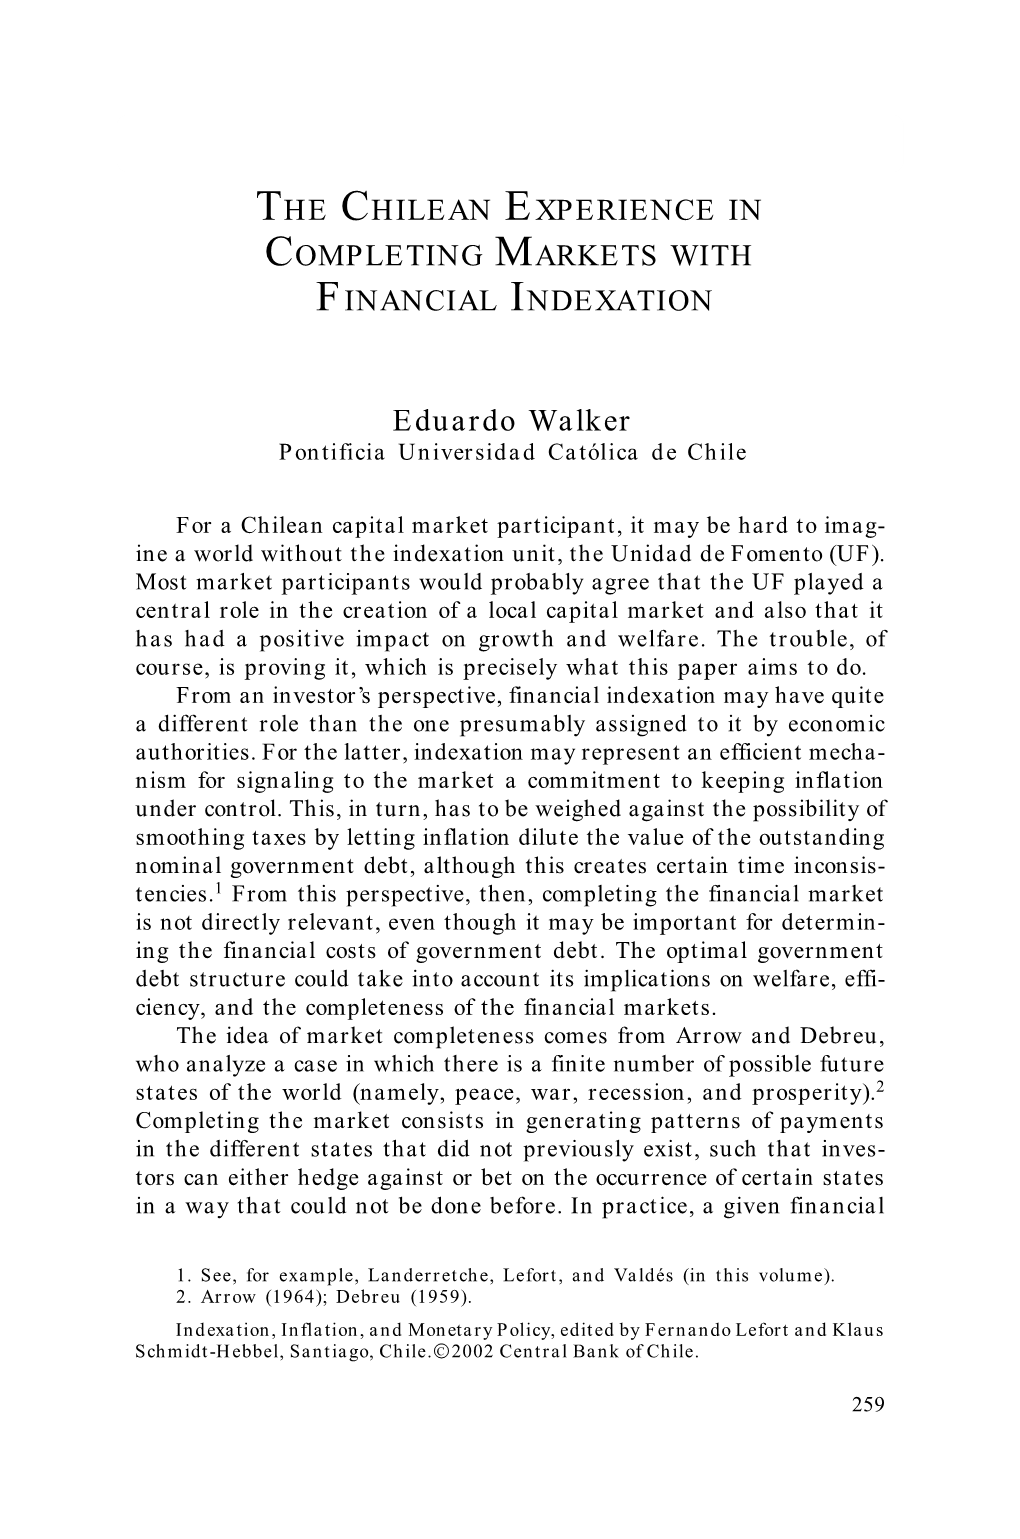 The Chilean Experience in Completing Markets with Financial Indexation